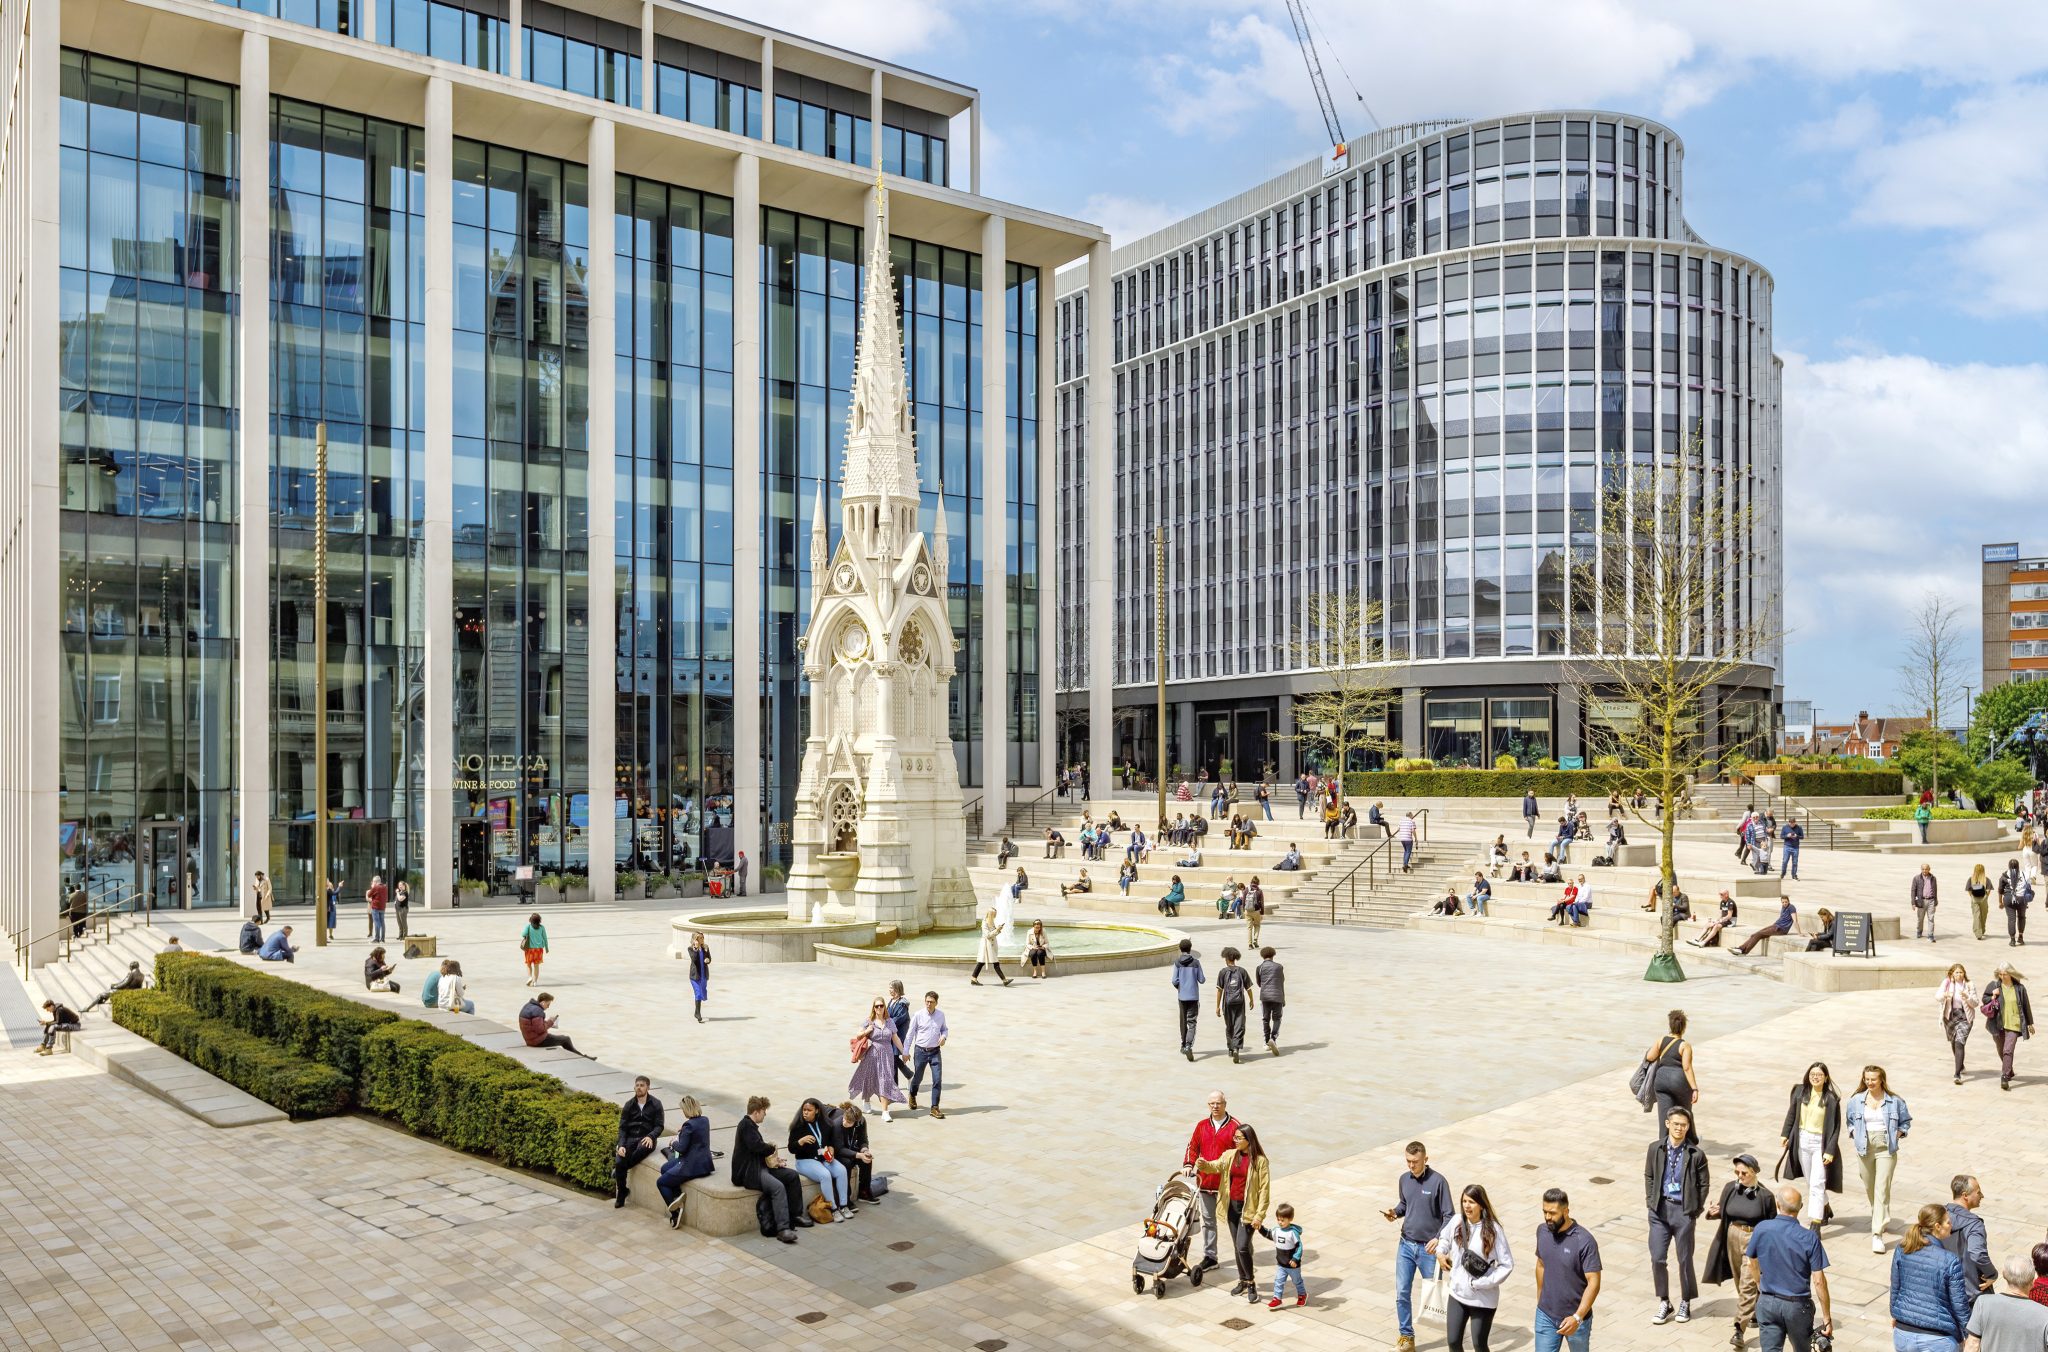 Chamberlain Square sits at the heart of Paradise